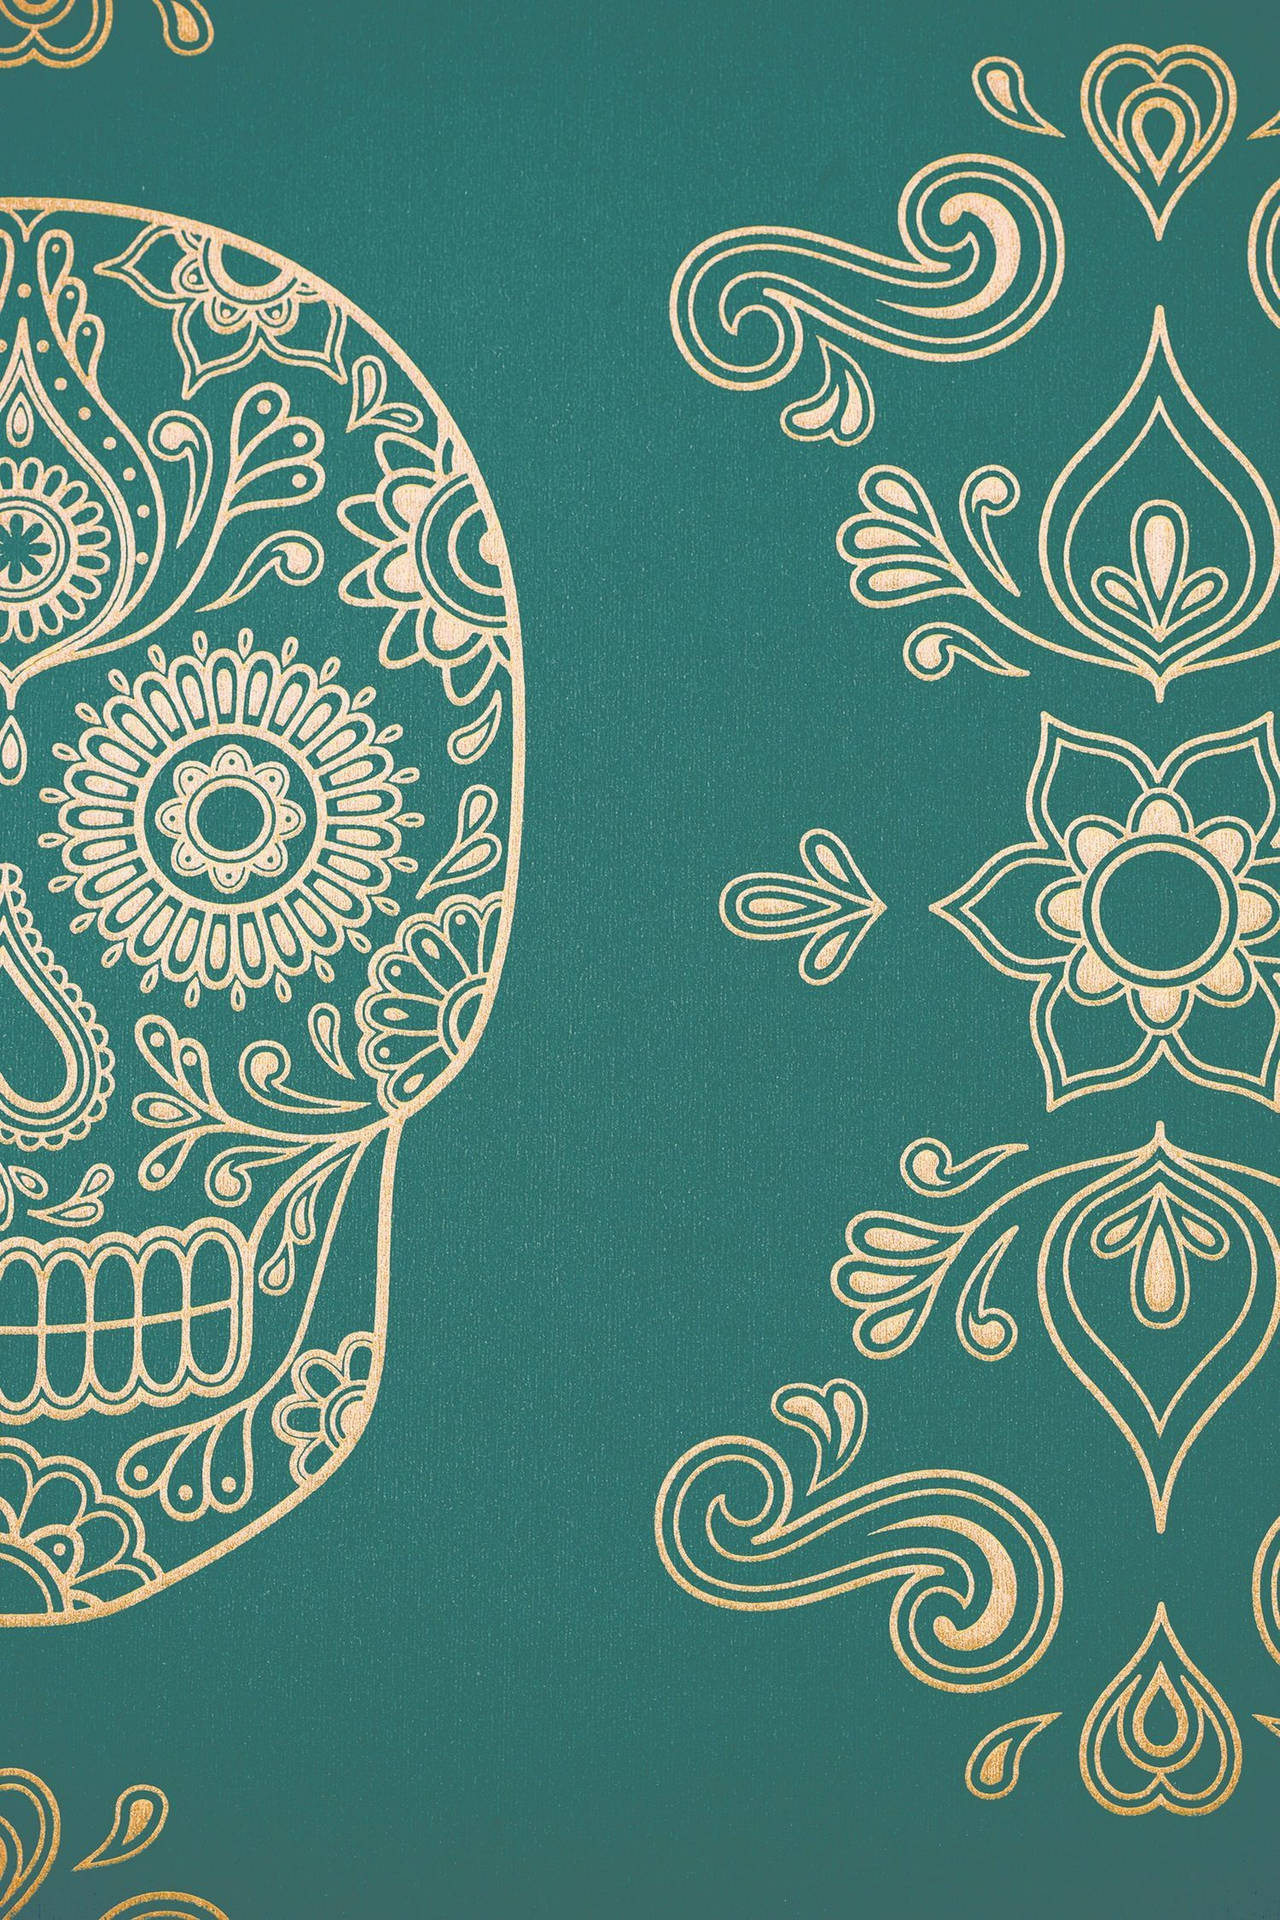 Sugar Skull 1500X2250 Wallpaper and Background Image